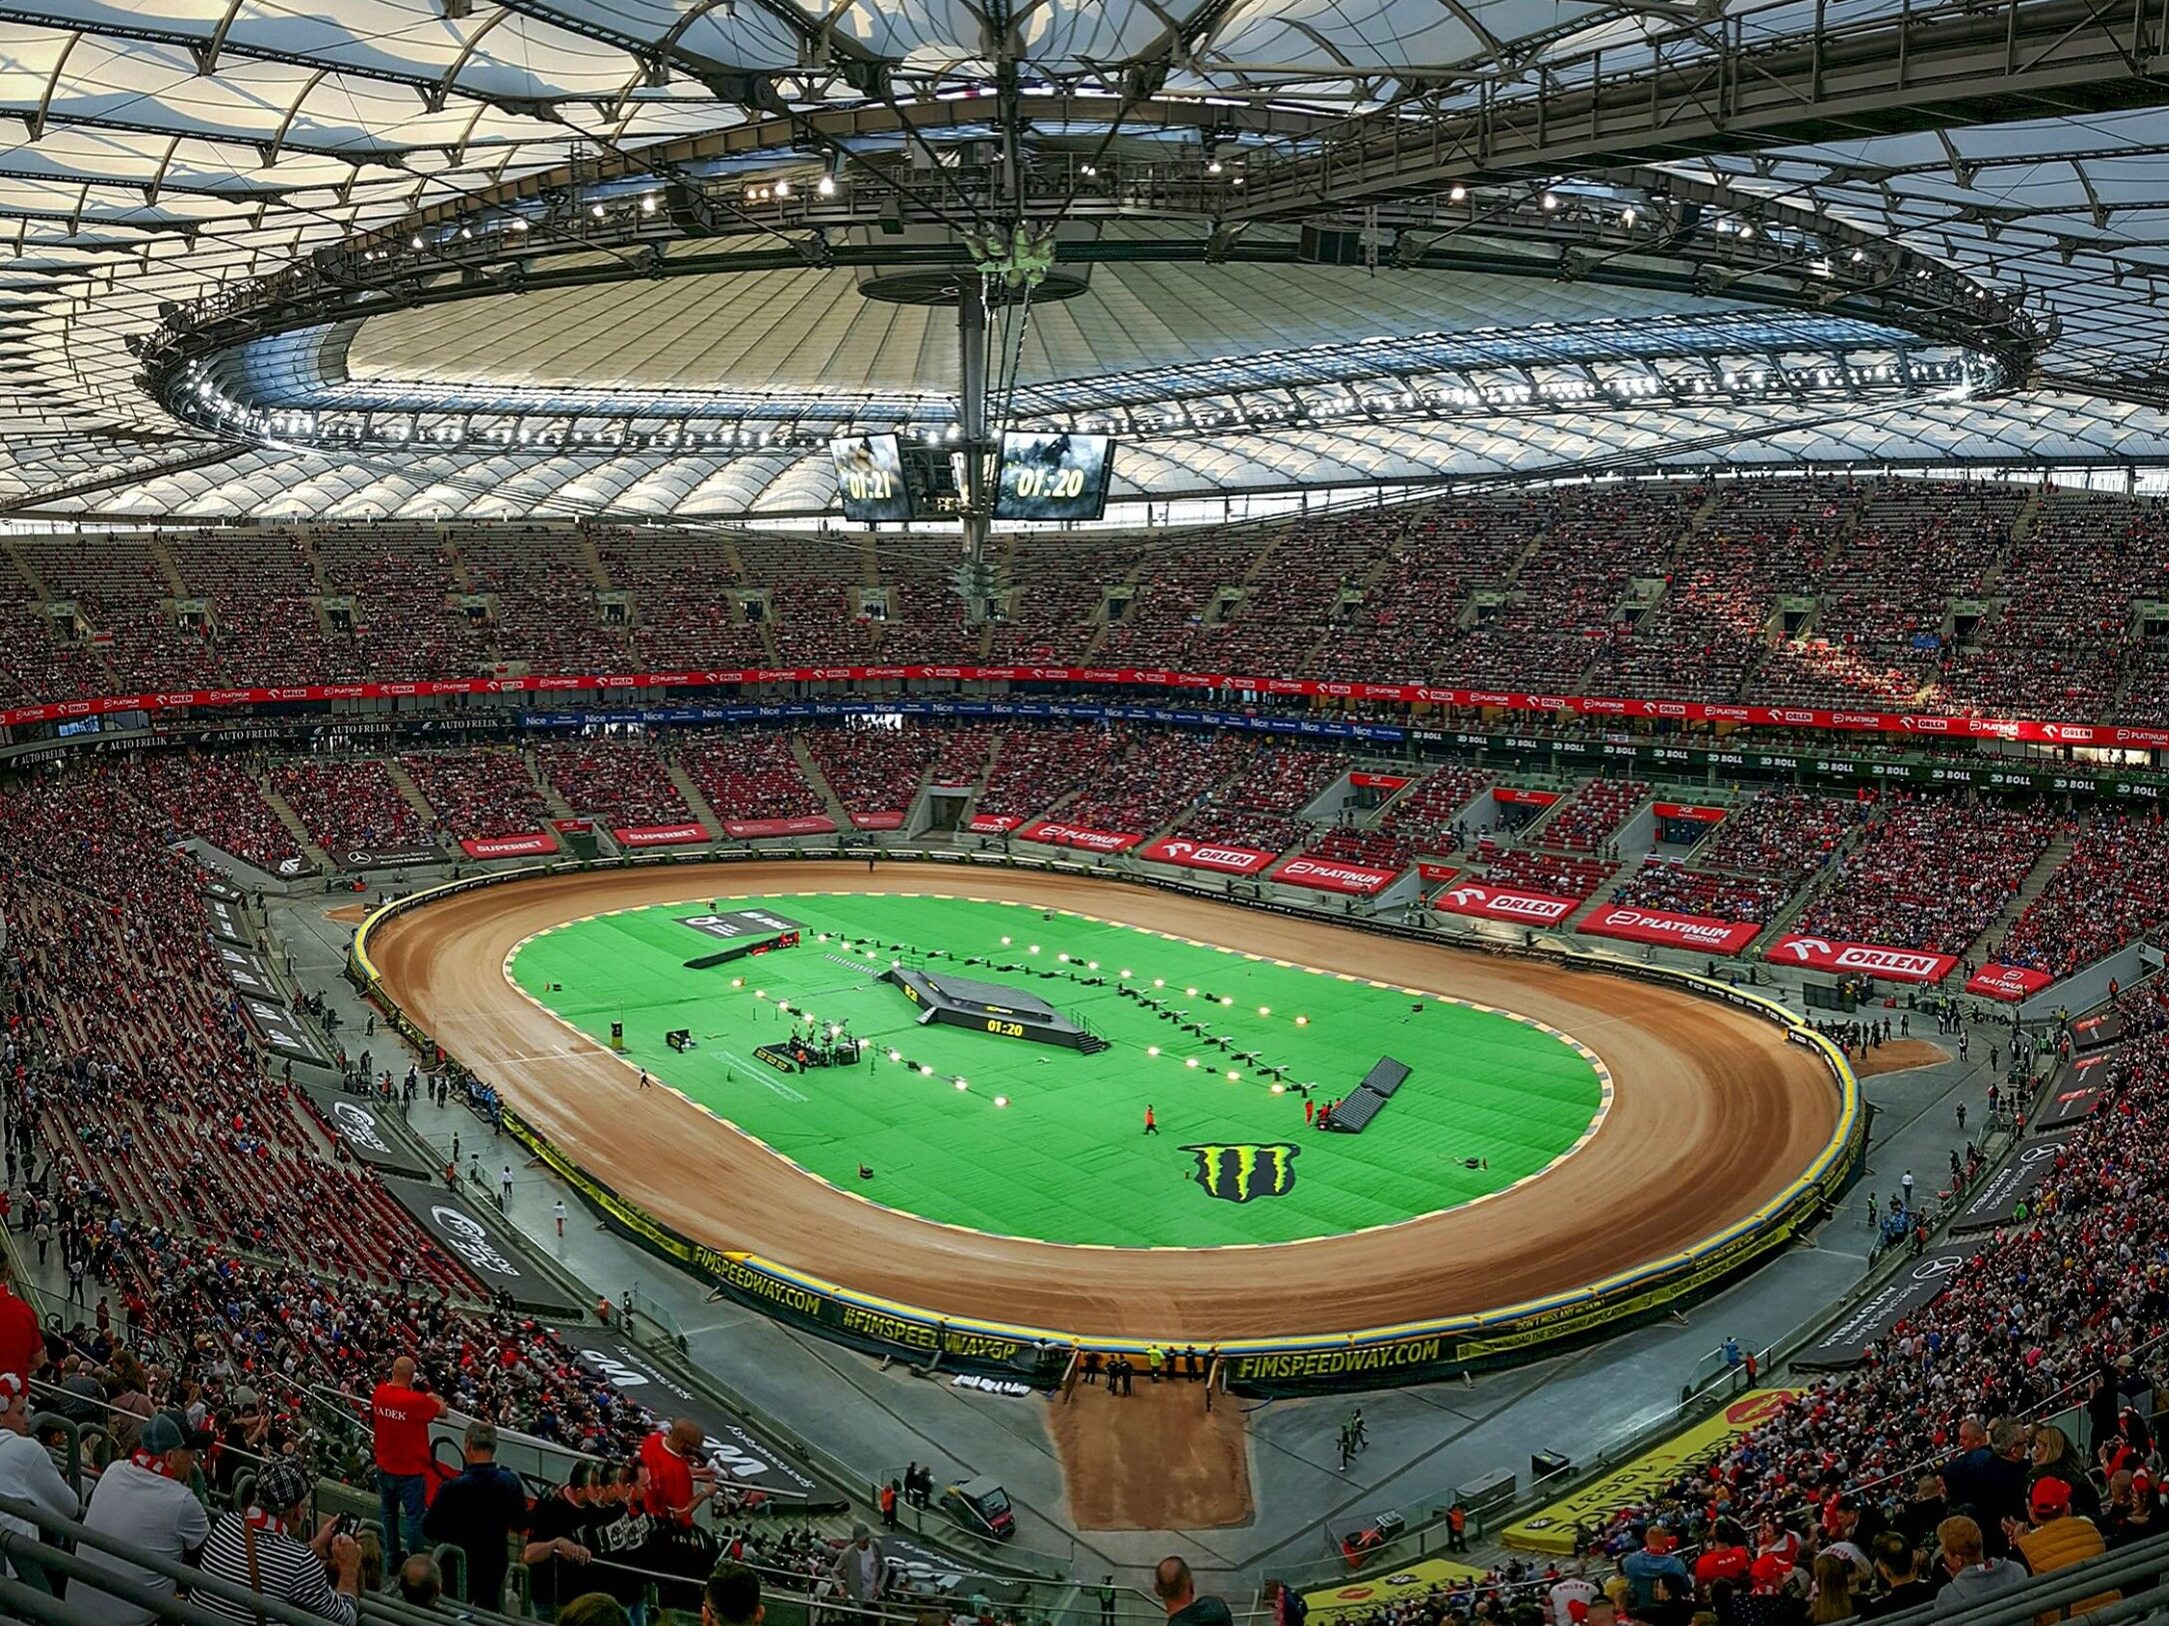 Great news.  PGE Narodowy may be full again